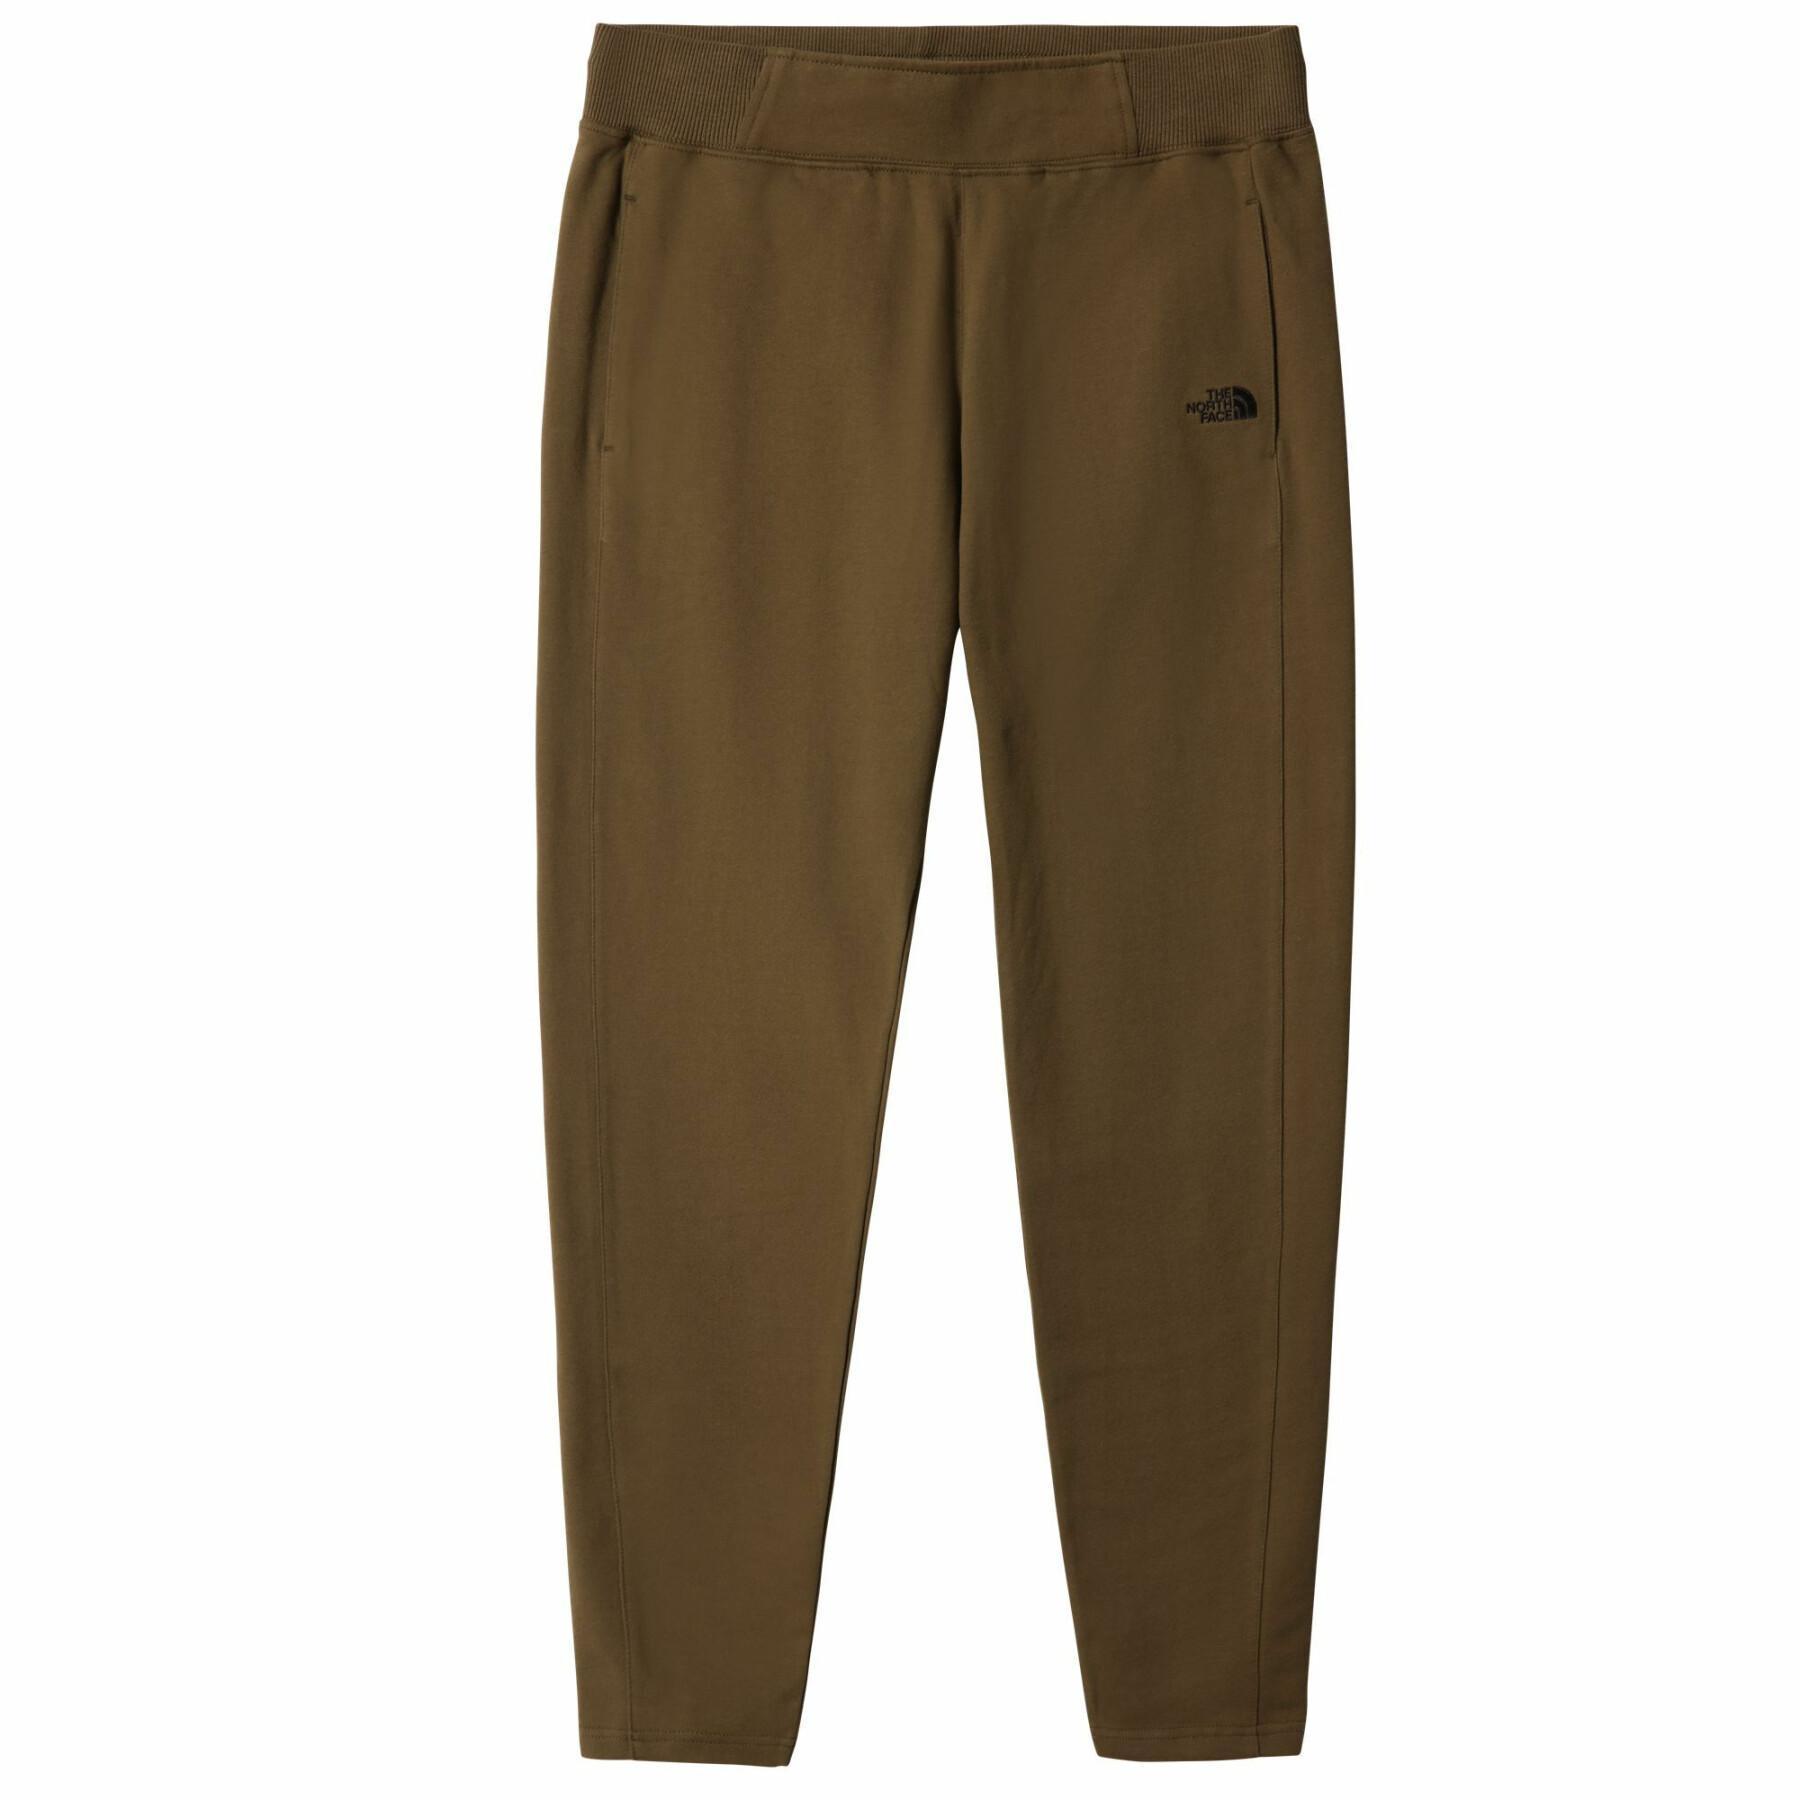 Women's pants The North Face Nse Light